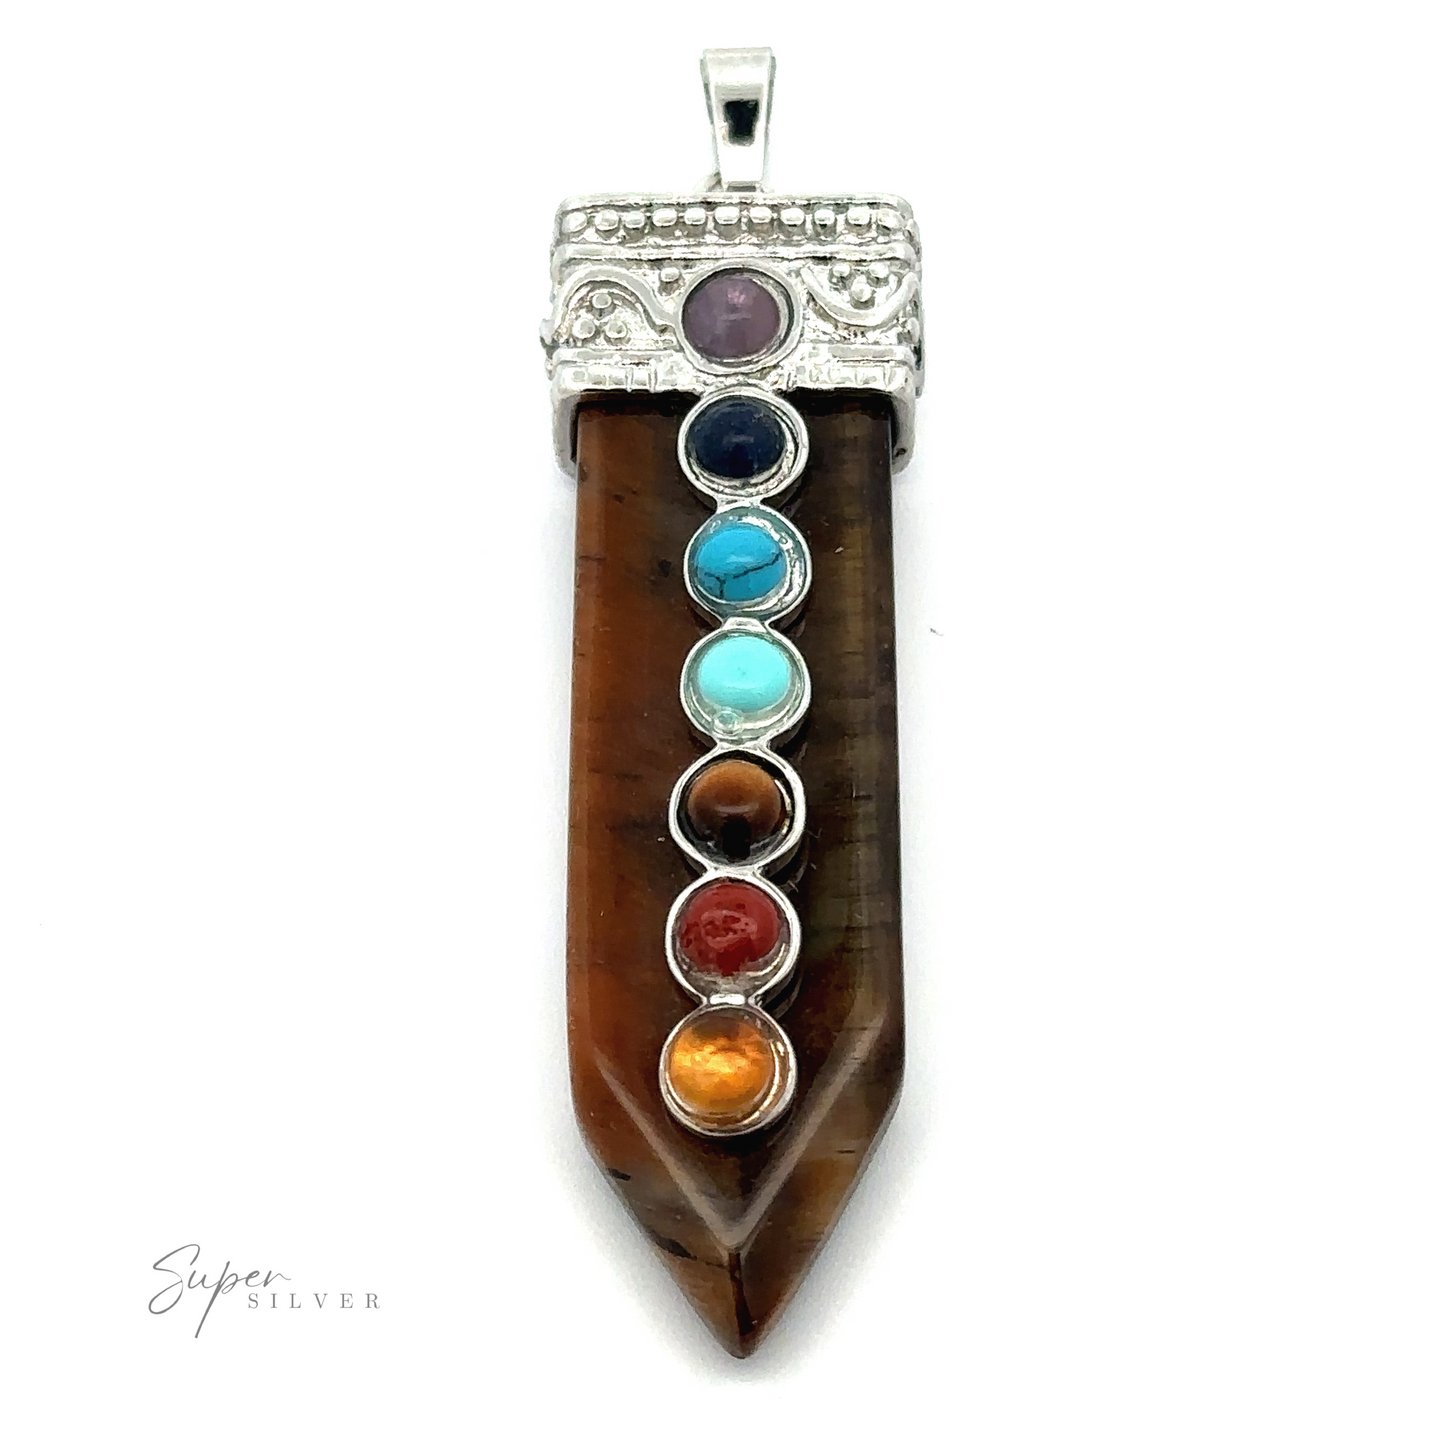 
                  
                    A stunning Obelisk Crystal Pendant with Small Chakra Stones featuring a pointed brown gemstone, accentuated by seven colorful chakra stones set vertically in a sophisticated silver-plated design.
                  
                